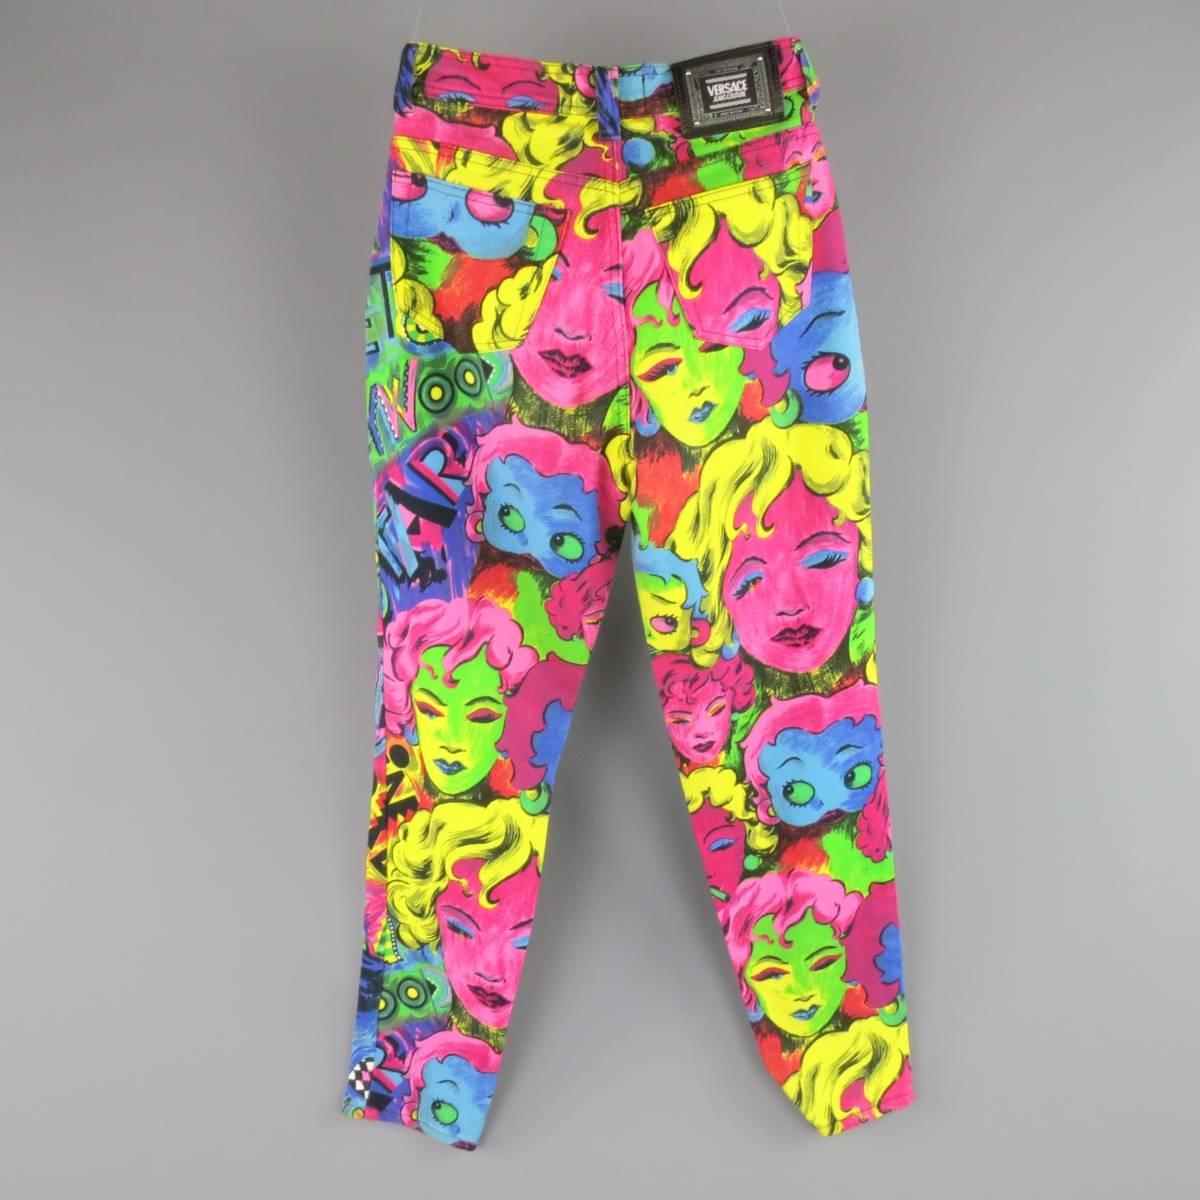 Brown GIANNI VERSACE Jeans COUTURE 6 Multi-Color Marilyn Monroe and Betty Boop Jeans